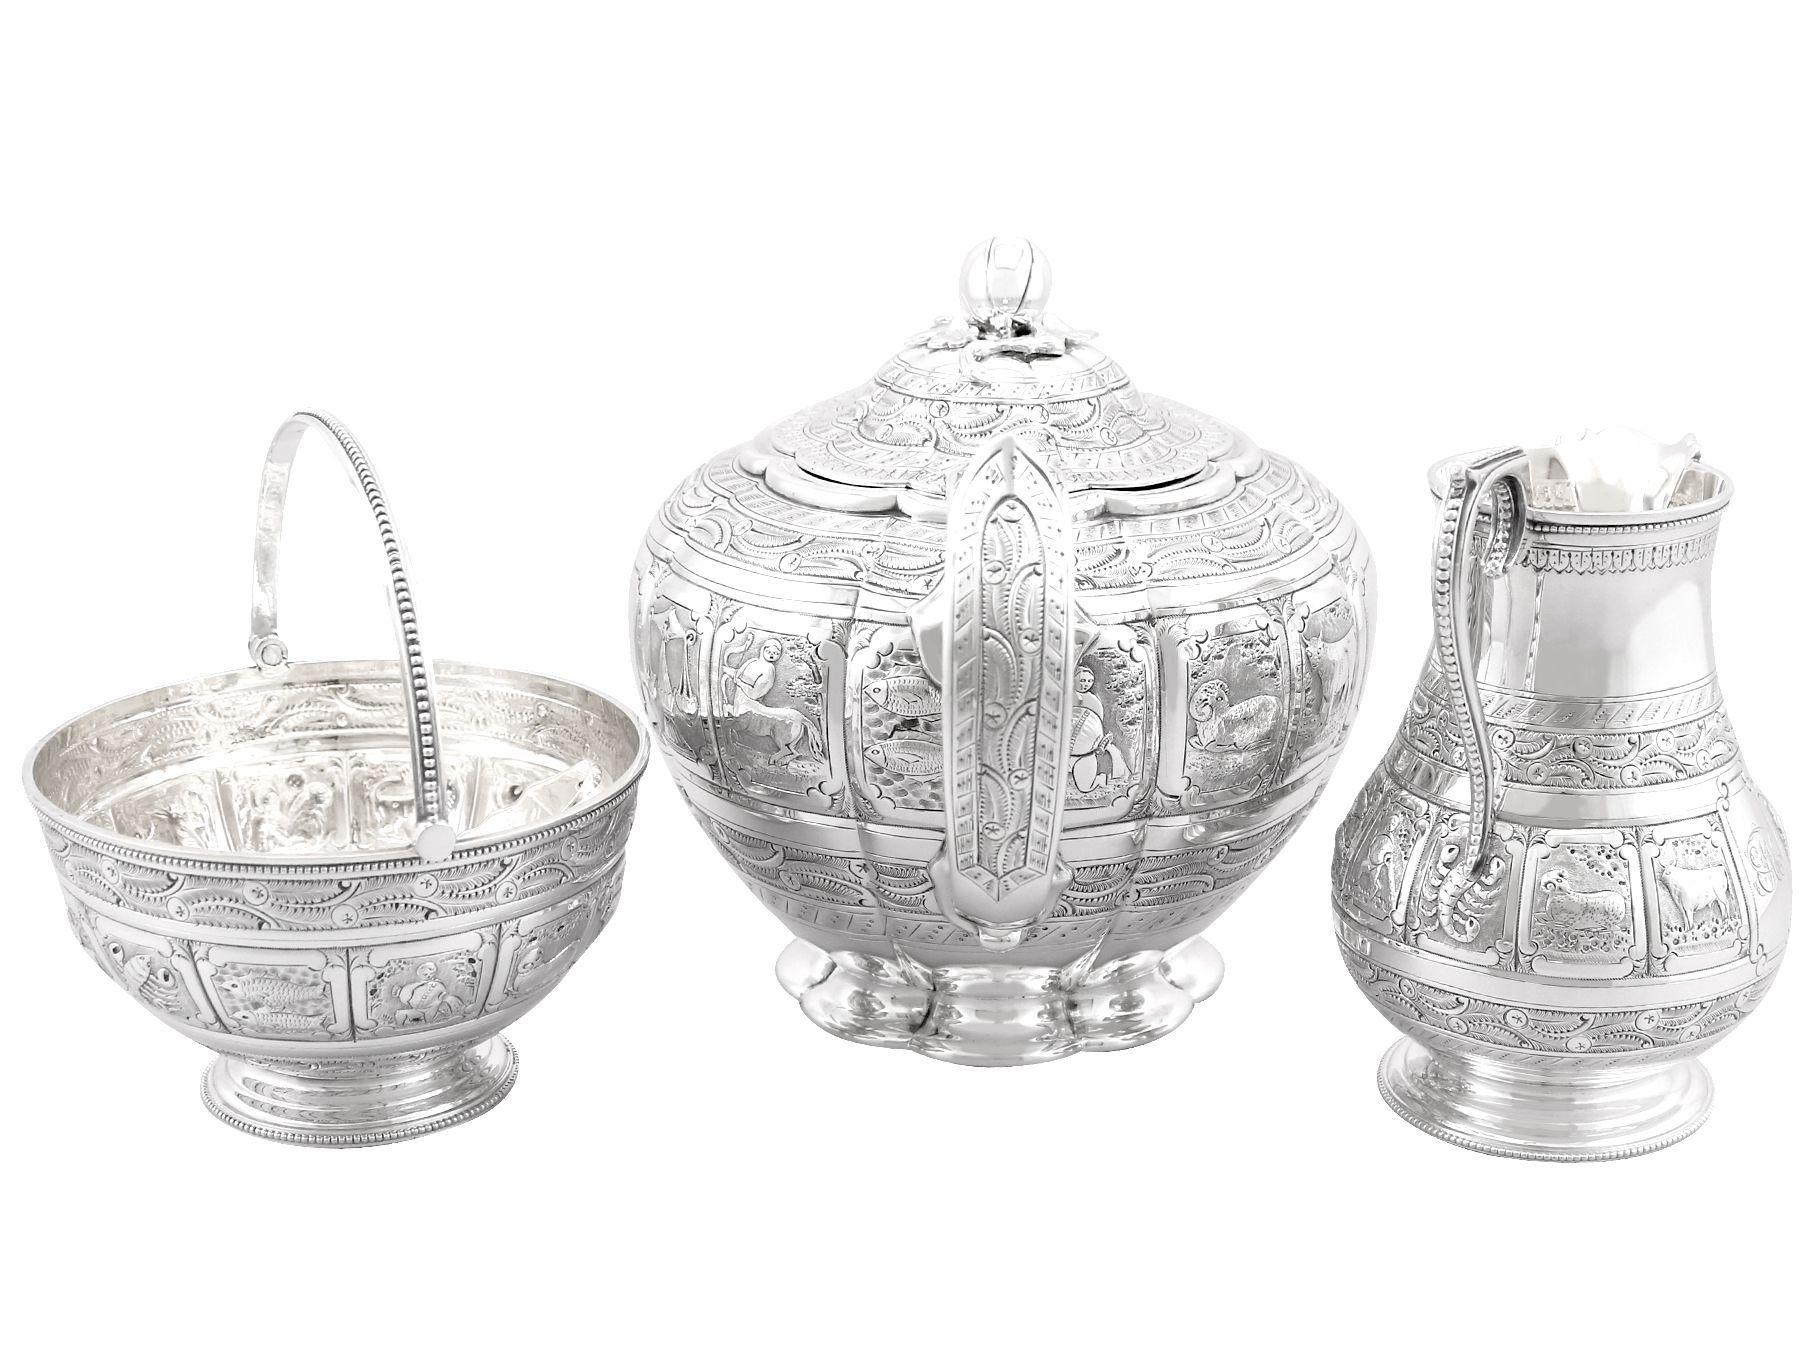 An exceptional, fine and impressive antique Victorian English sterling silver three piece tea service, with Zodiac influence; part of our silver teaware collection
This exceptional antique Victorian silver tea set, in sterling standard, consists of